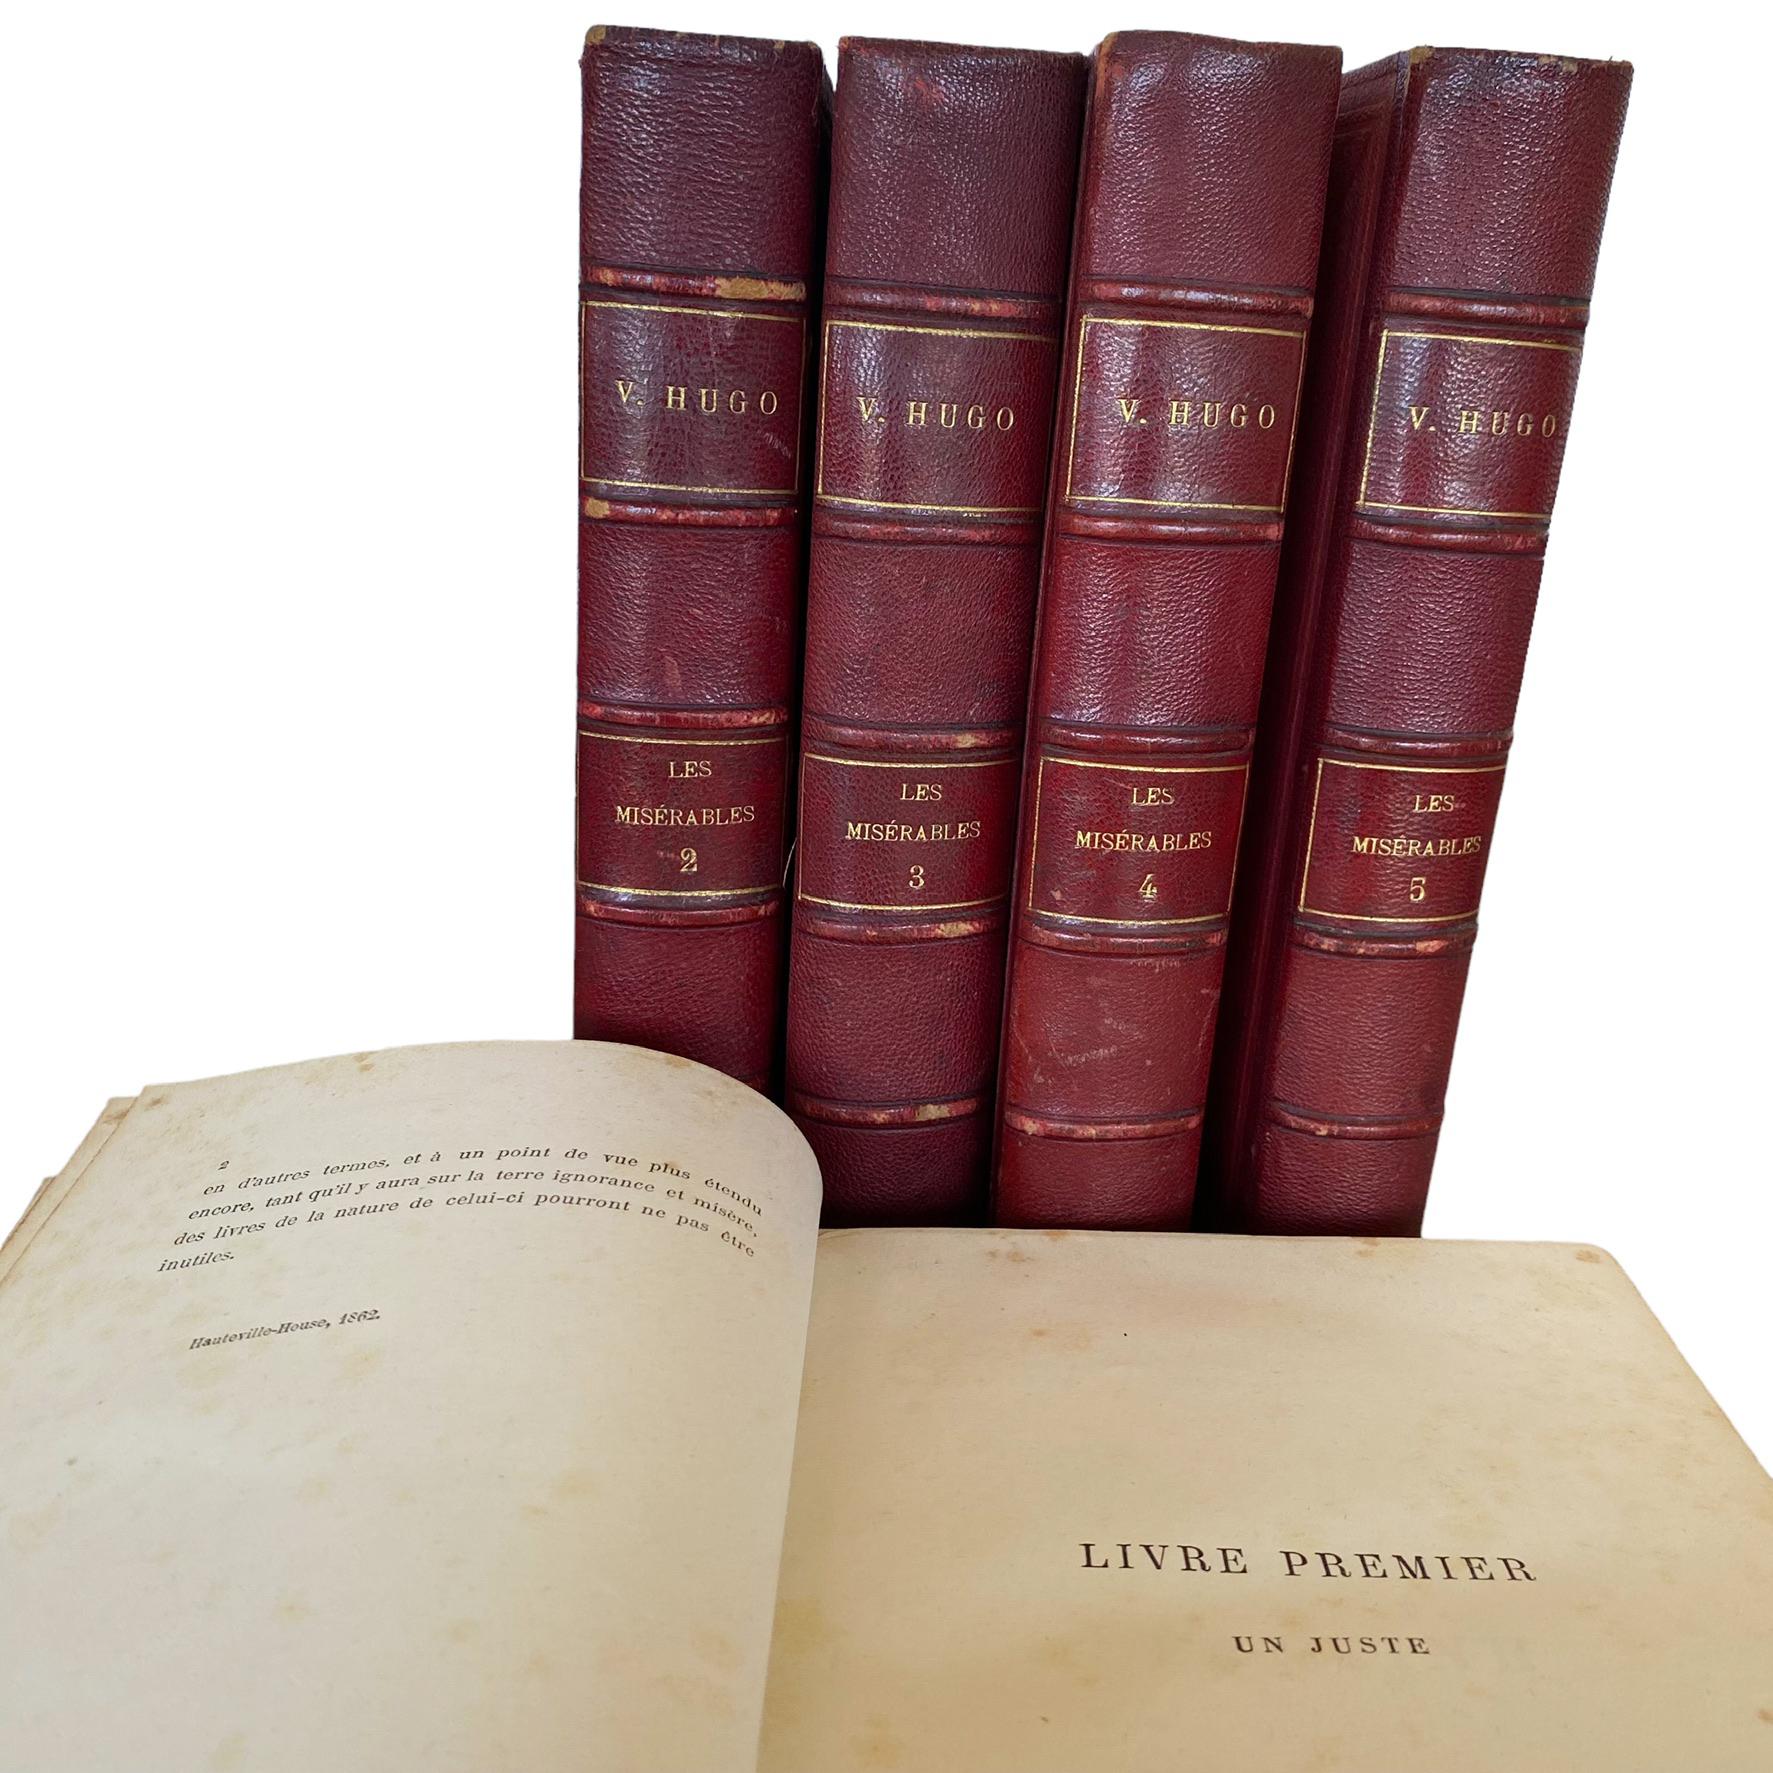 Direct from France, ships from Boston.
Like Les Mis? Read French? This will make the best gift for your bookshelf or for your loved one.
Seems to be 1862 1st edition  - see 2nd photo on the page left
Edition Herzel-Quantin in Paris
All 5 books are